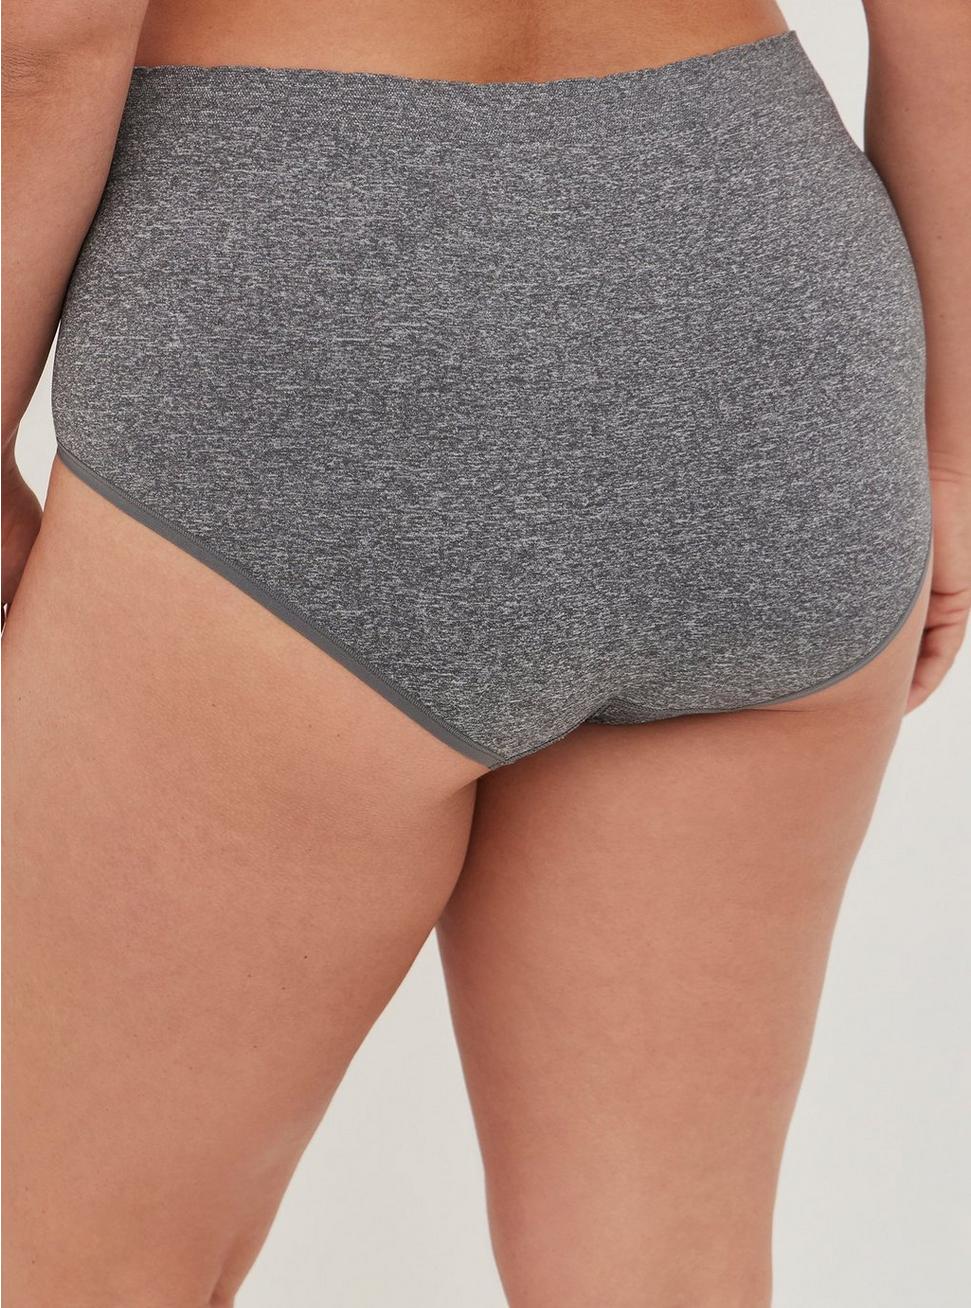 Plus Size Seamless Smooth Heather Mid Rise Brief Panty, HEATHER GREY, alternate